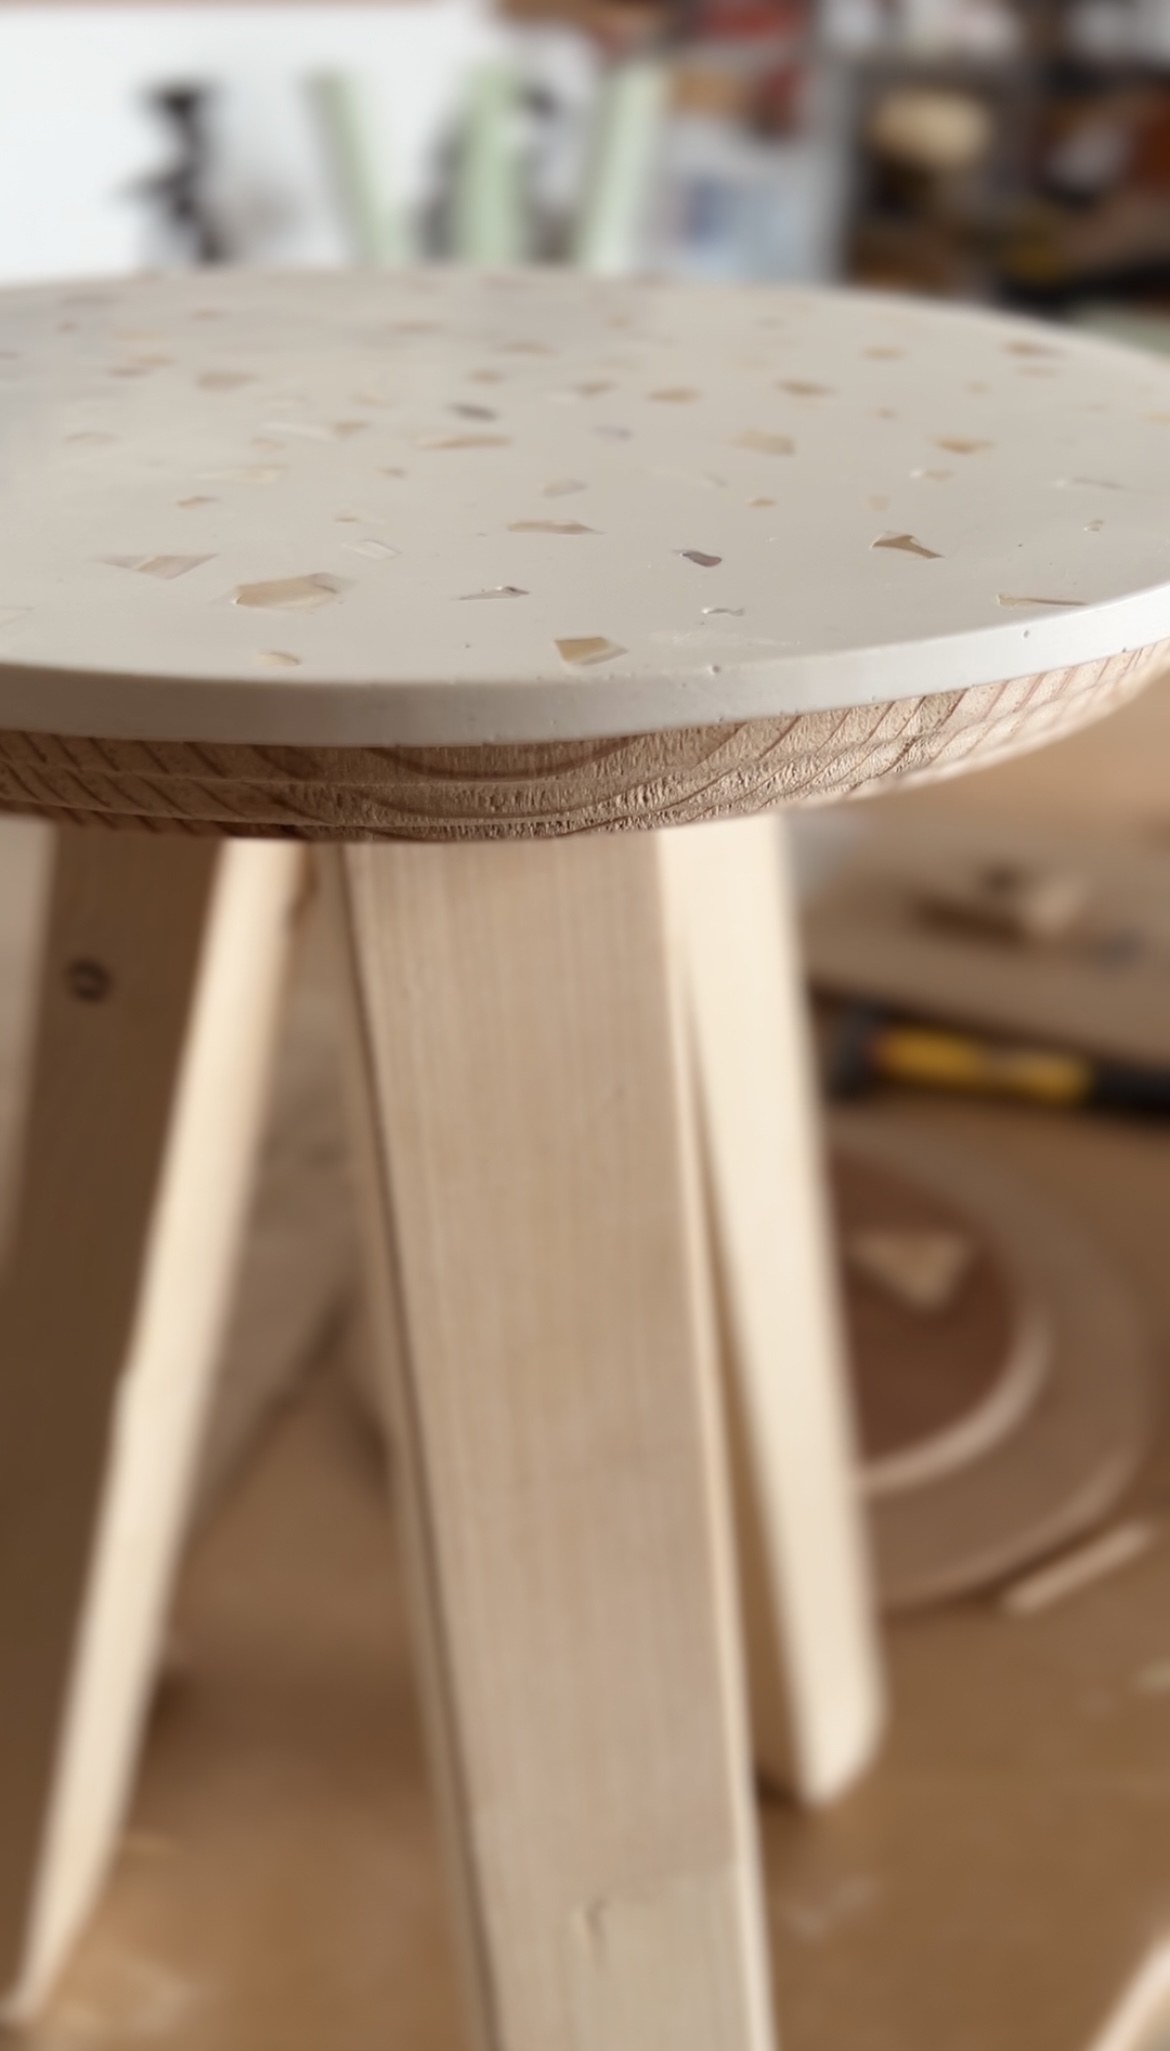 Handmade terrazzo topped wooden stool created by artisanal furniture makers The Limoncino